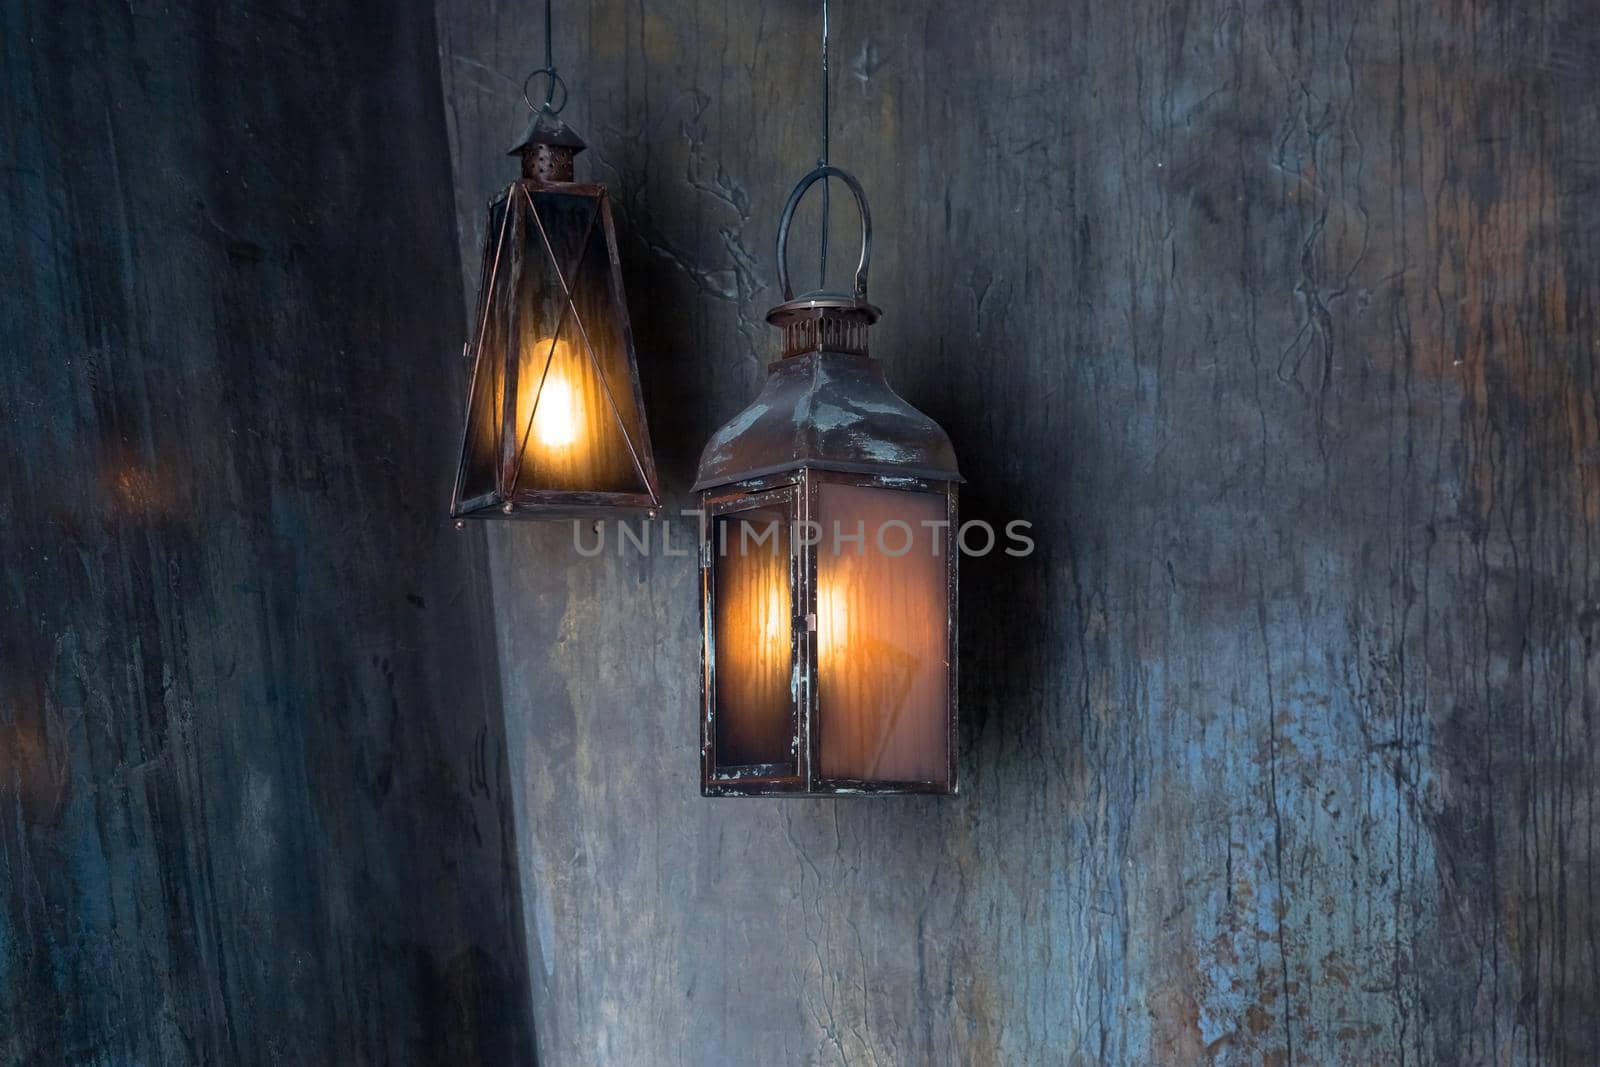 Lantern hang in front of wooden house in the night